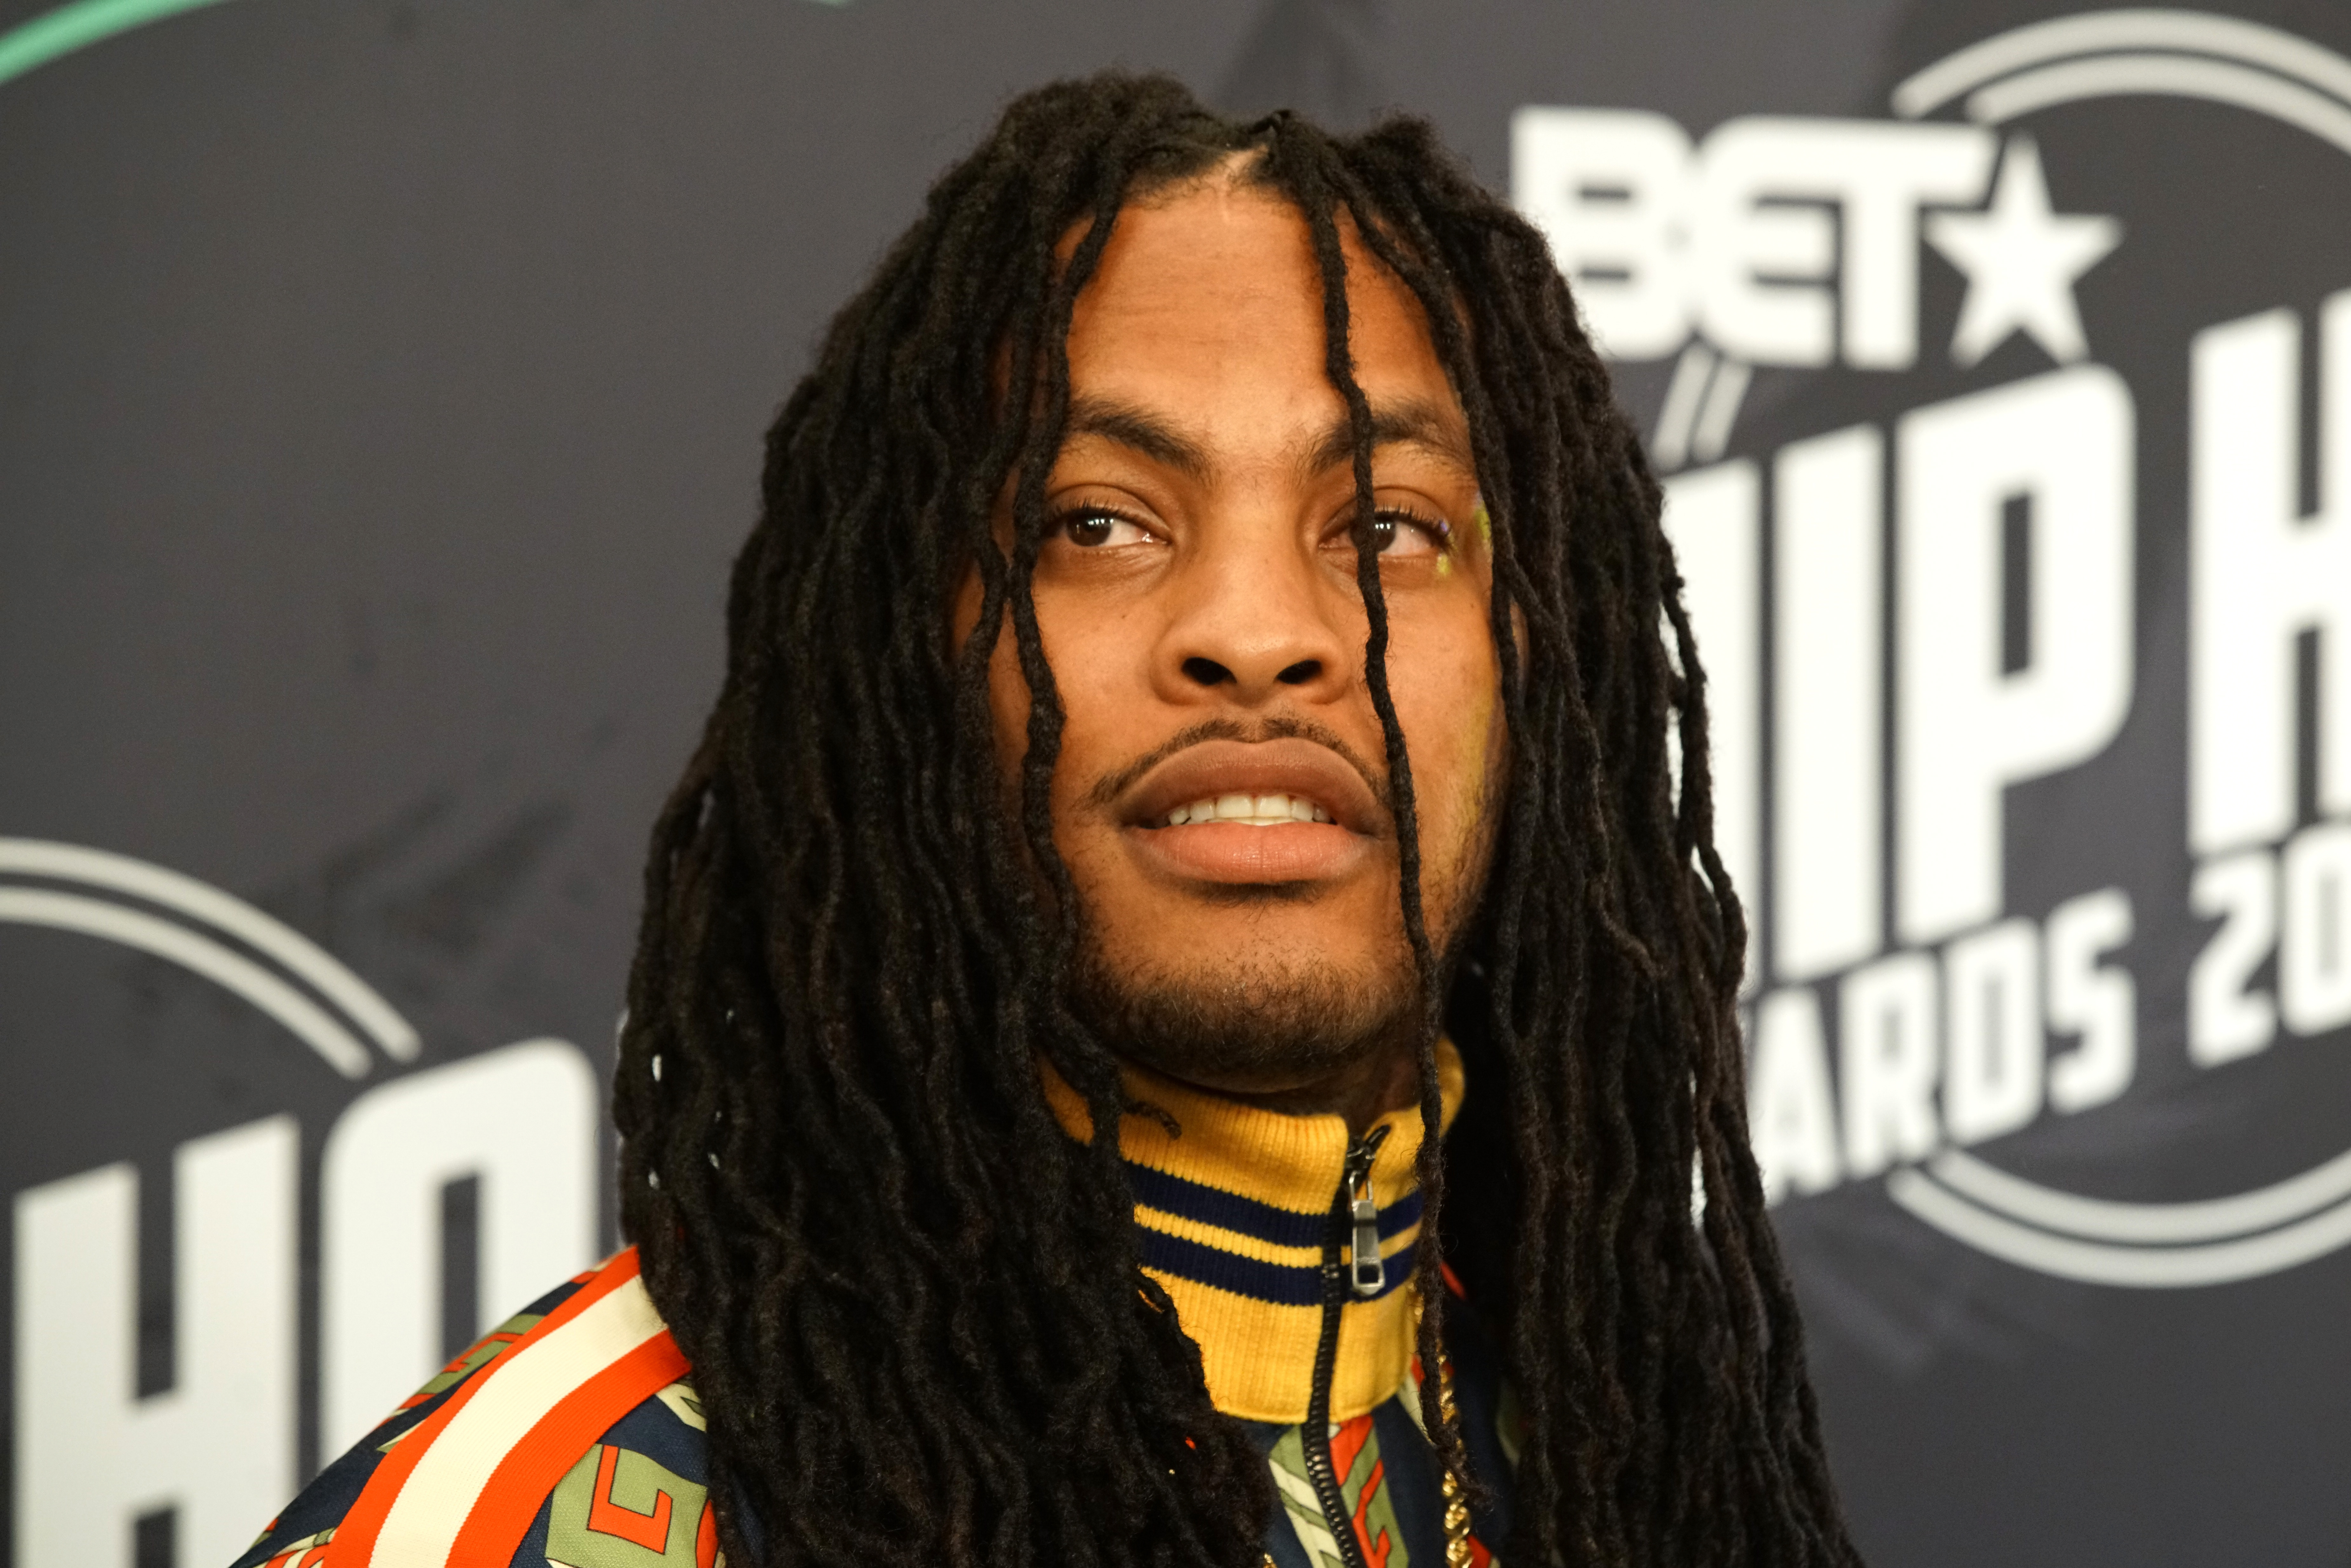 Waka Flocka Flame Seems Kind of Bummed About No Longer Being Friends With Gucci Mane